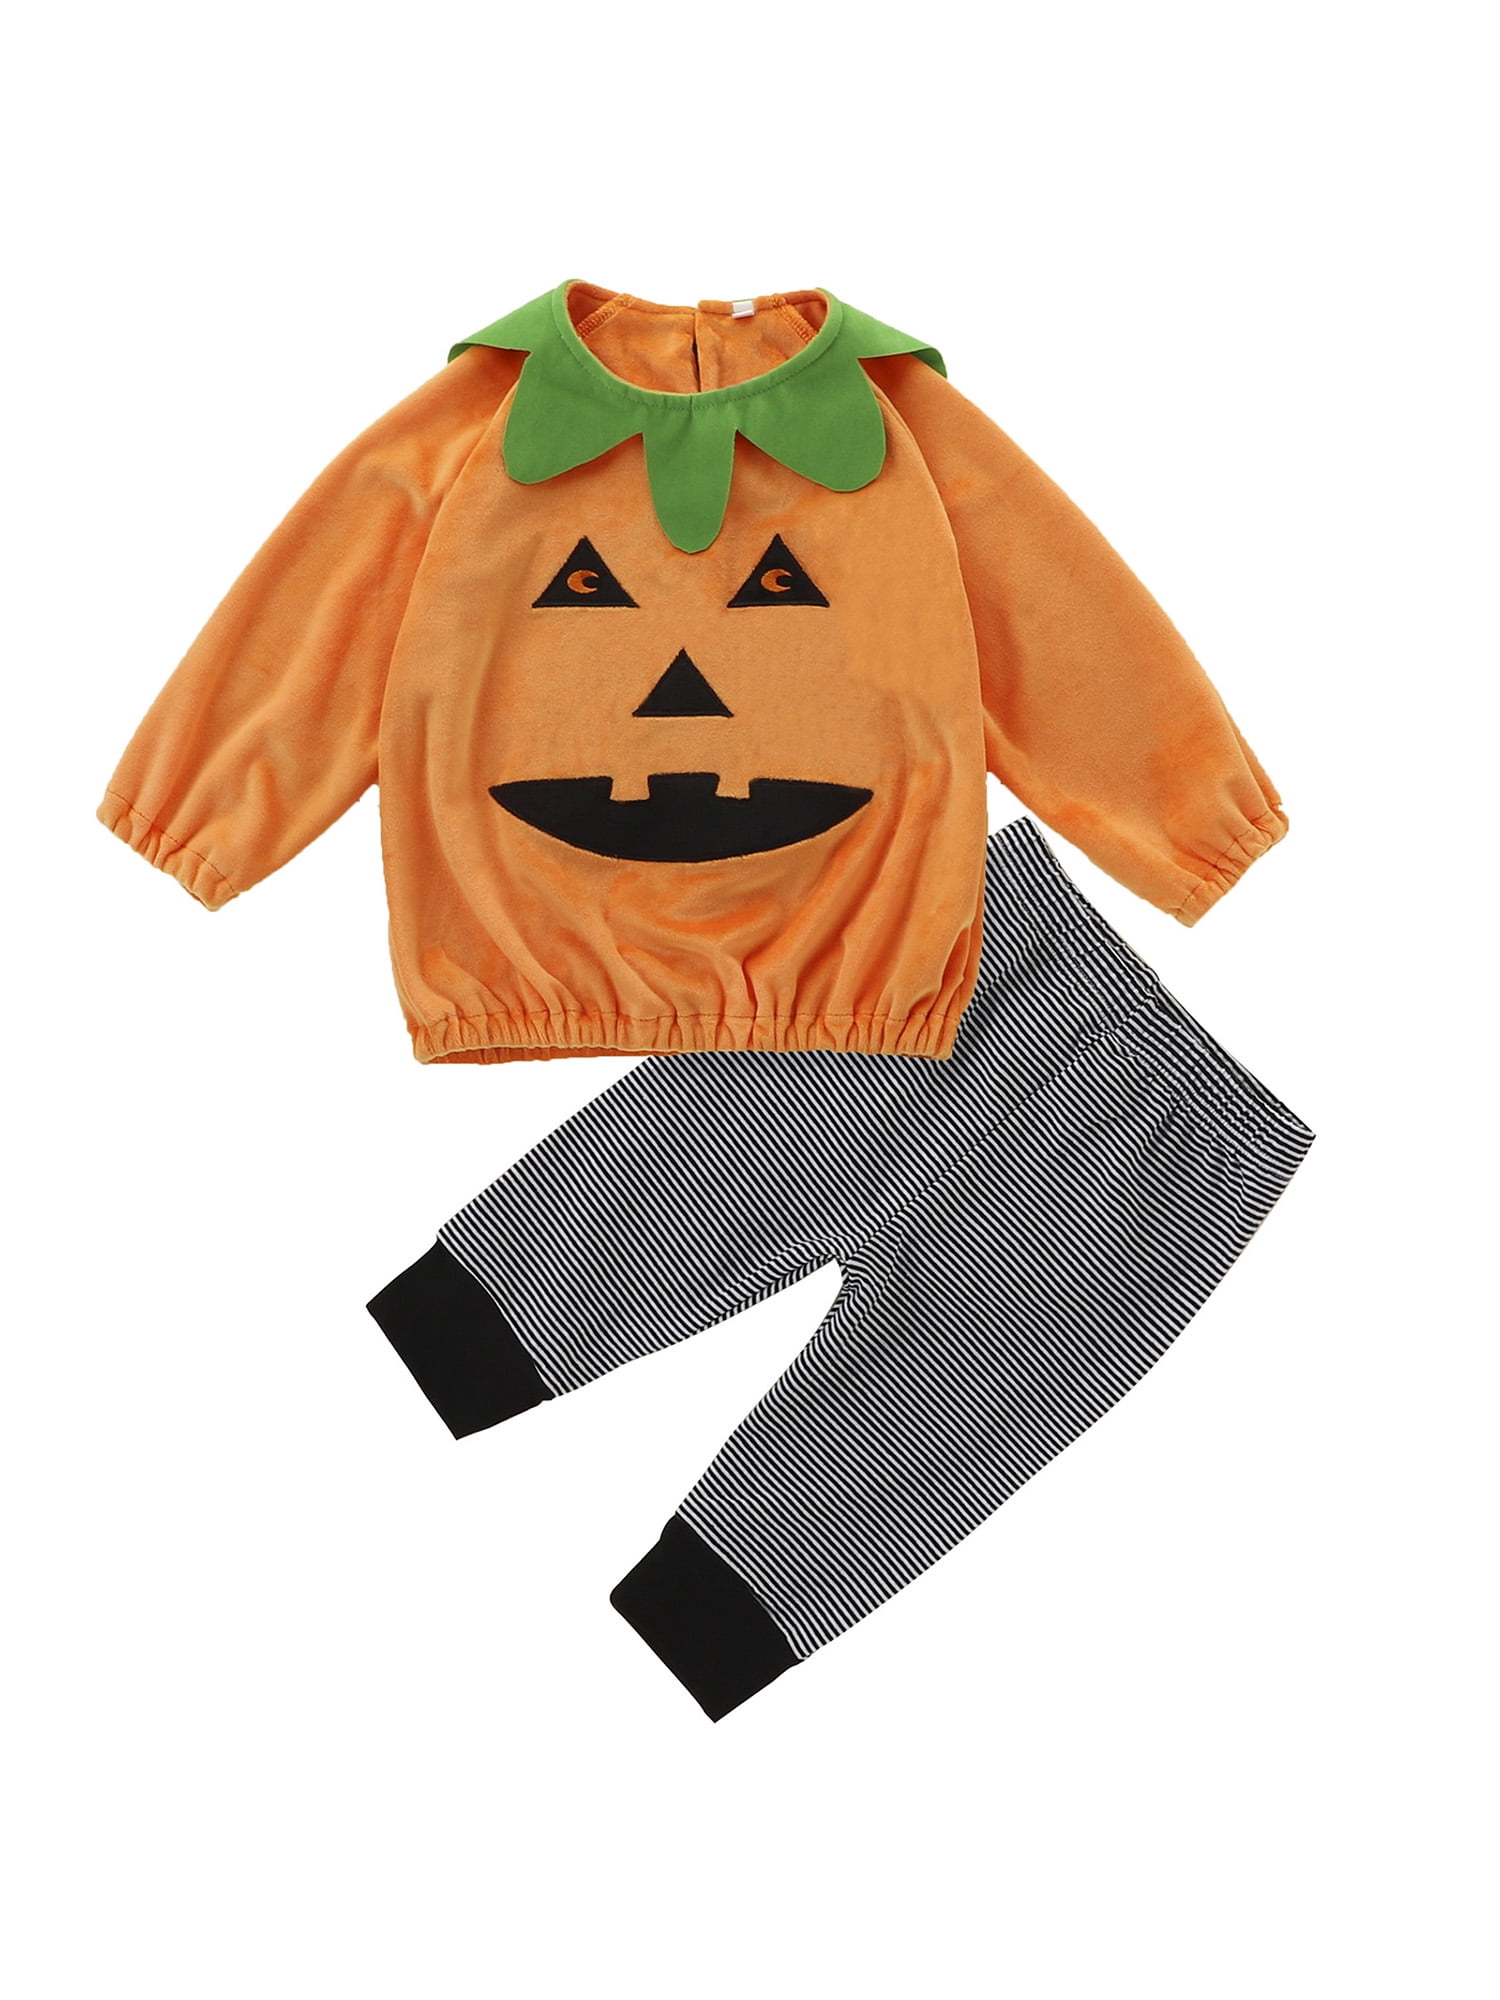 Baby Girl Halloween Outfit for Toddler Infant Tops Pants 2Pcs Set Baby Halloween Costume